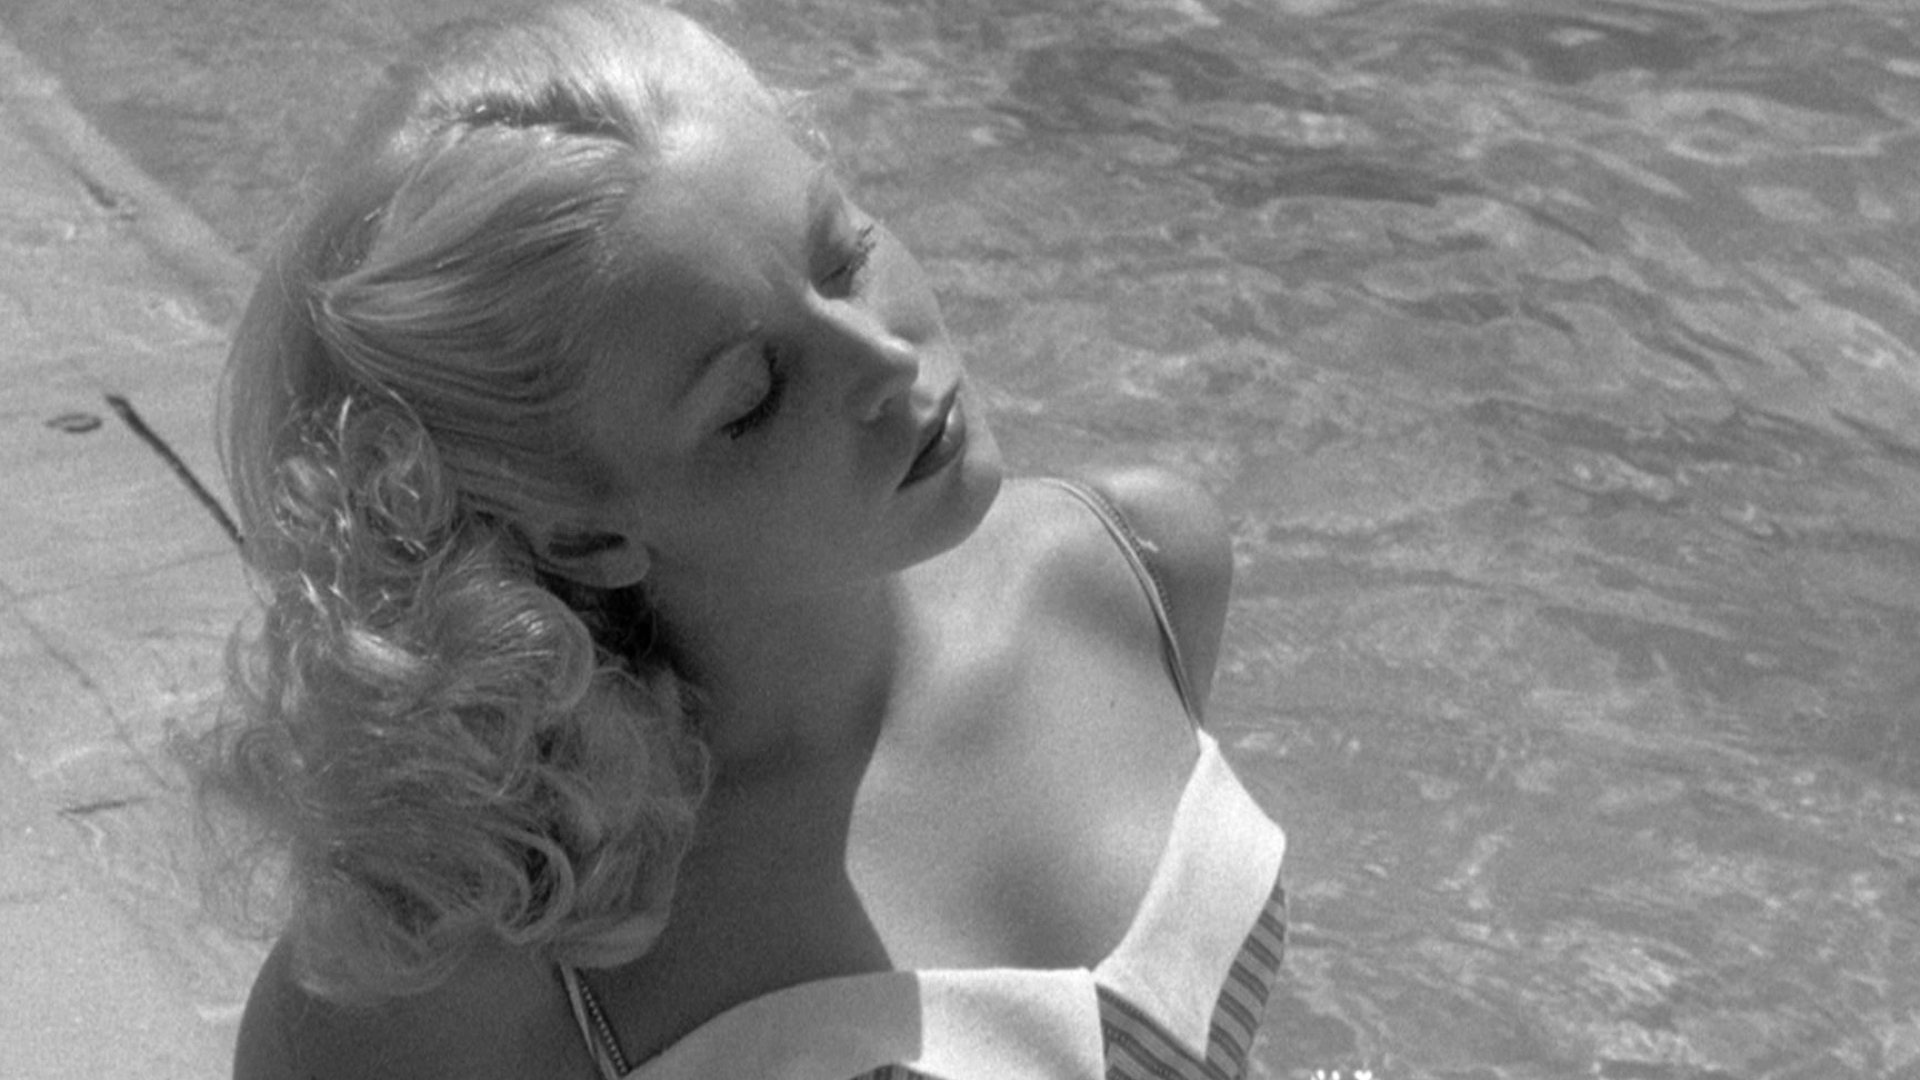 Raging Bull: Cathy Moriarty portrayed Vickie LaMotta, in her film debut. 1920x1080 Full HD Wallpaper.